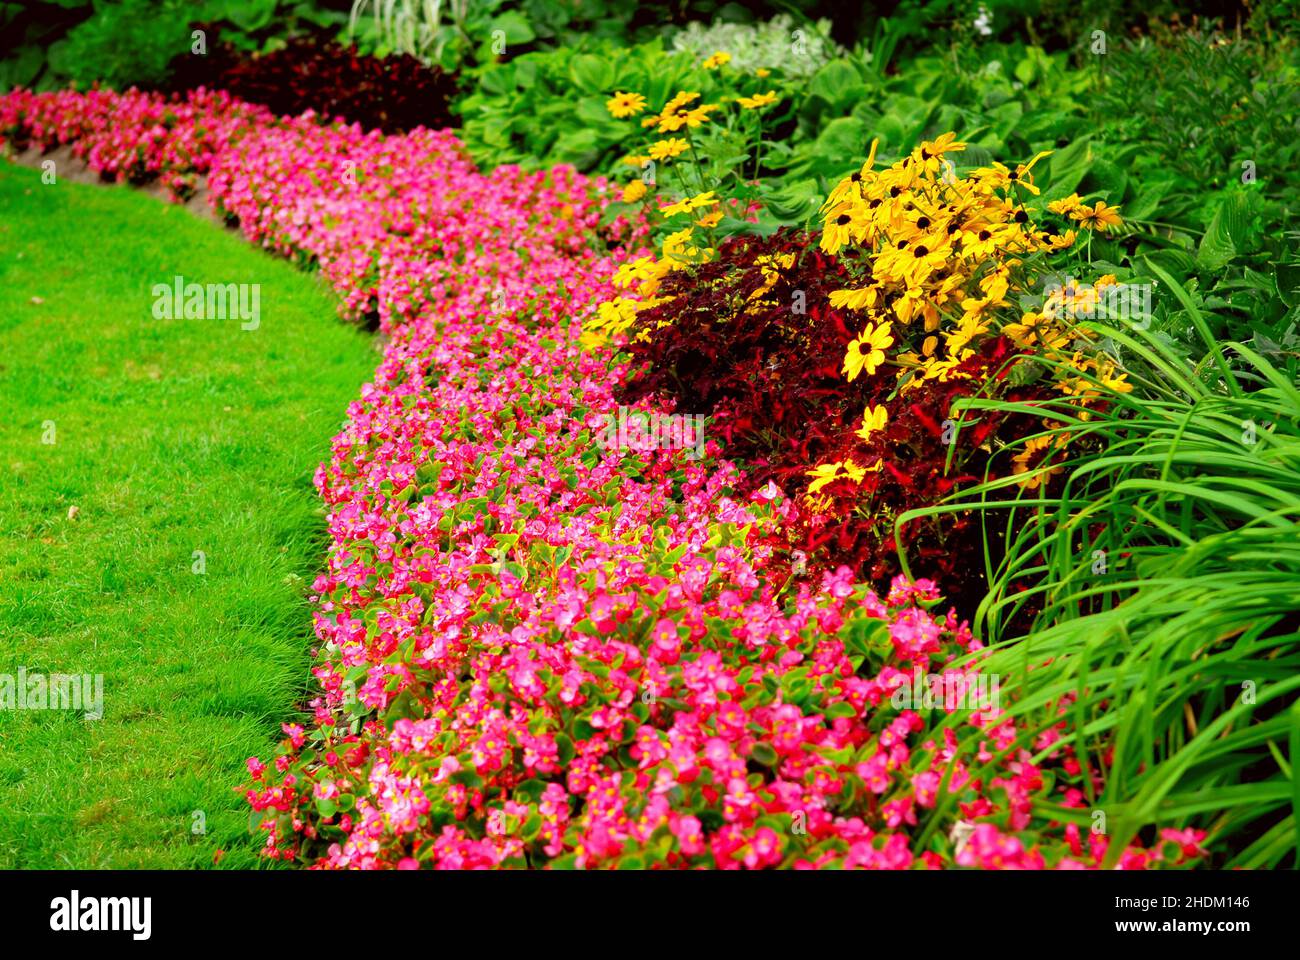 flower bed, flower beds Stock Photo